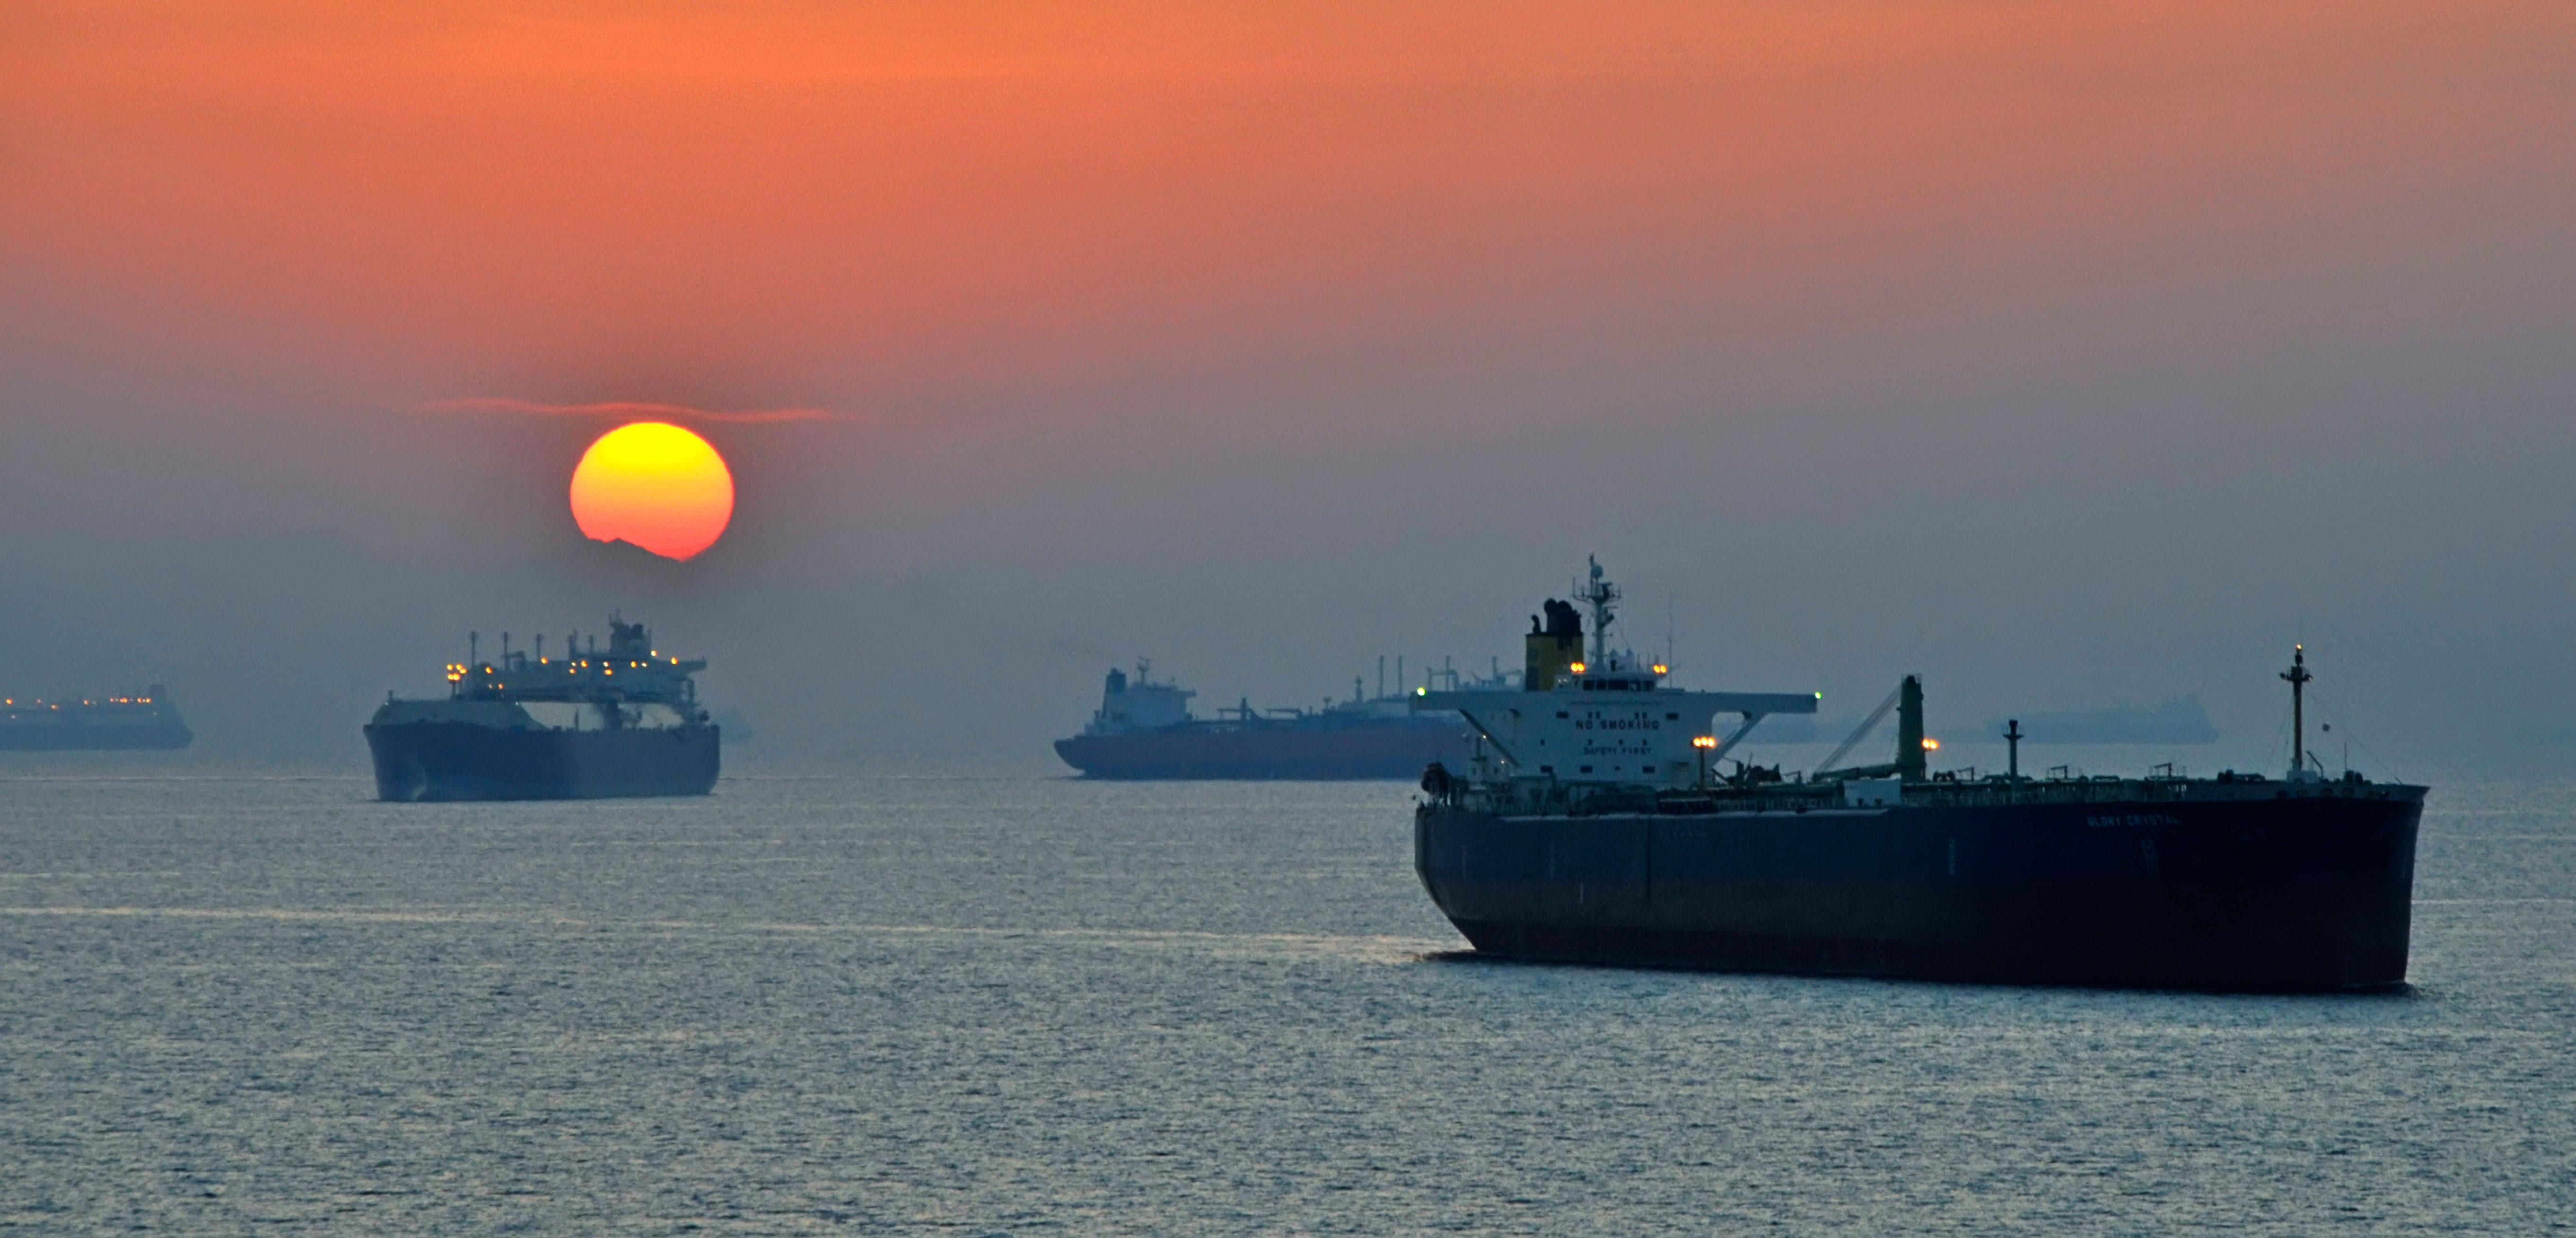 Ships off the coast of Fujairah in Gulf of Oman at sunset